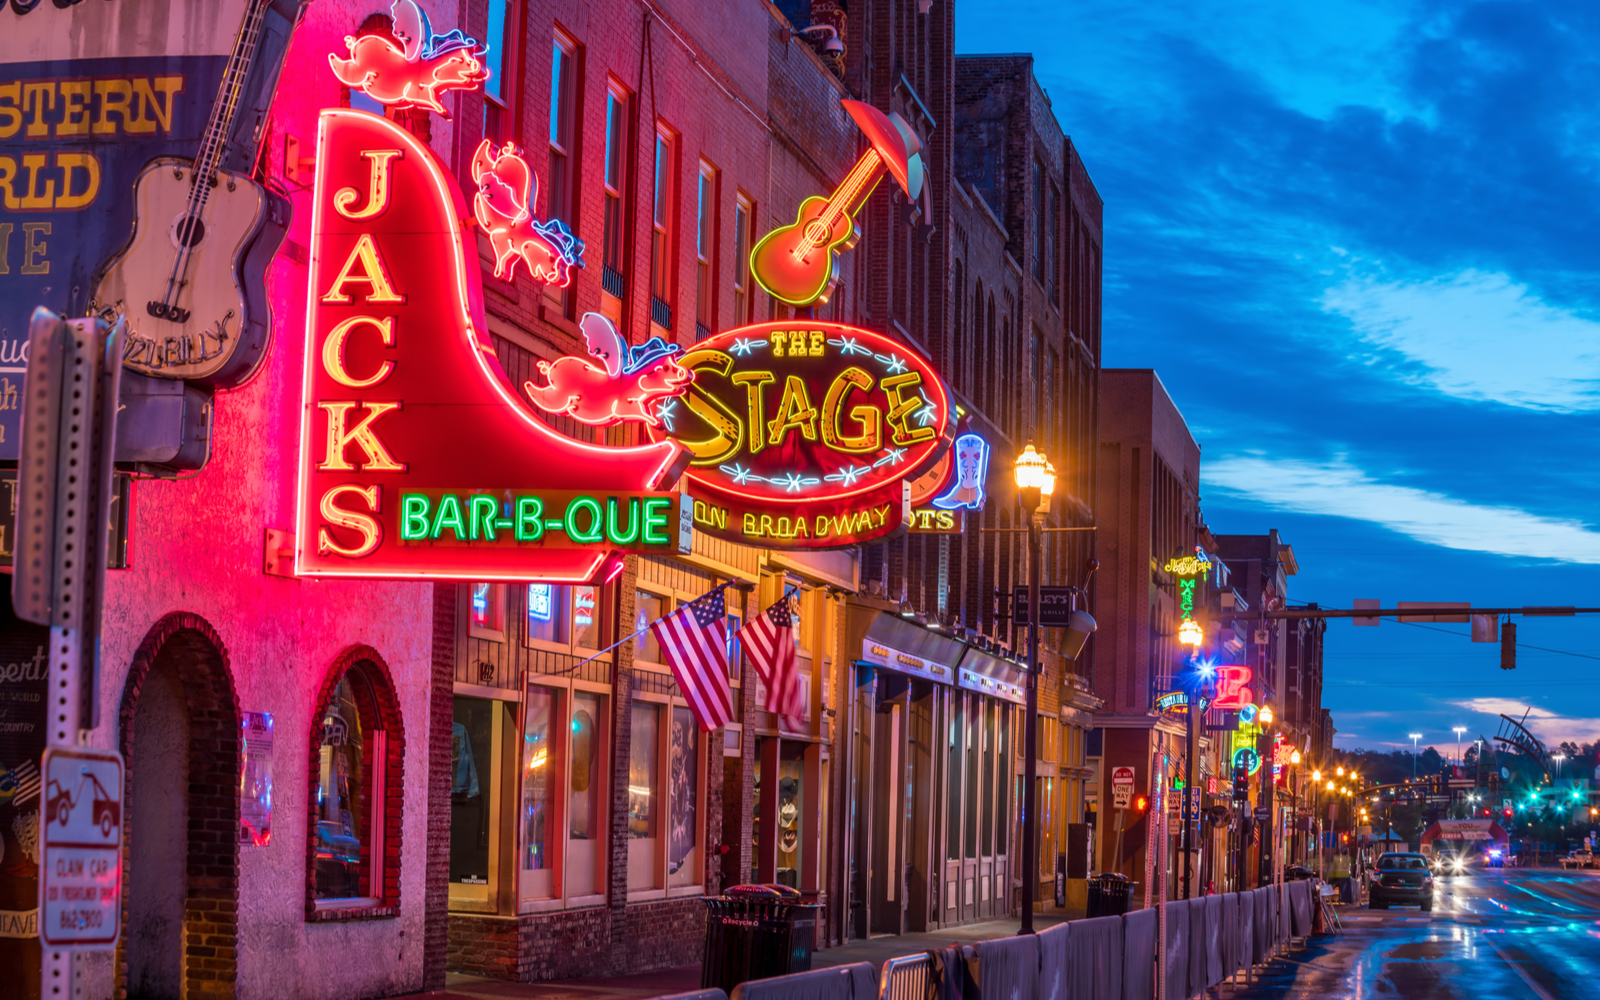 Night view of one of the best places to visit in Tennessee, Music Row in Nashville